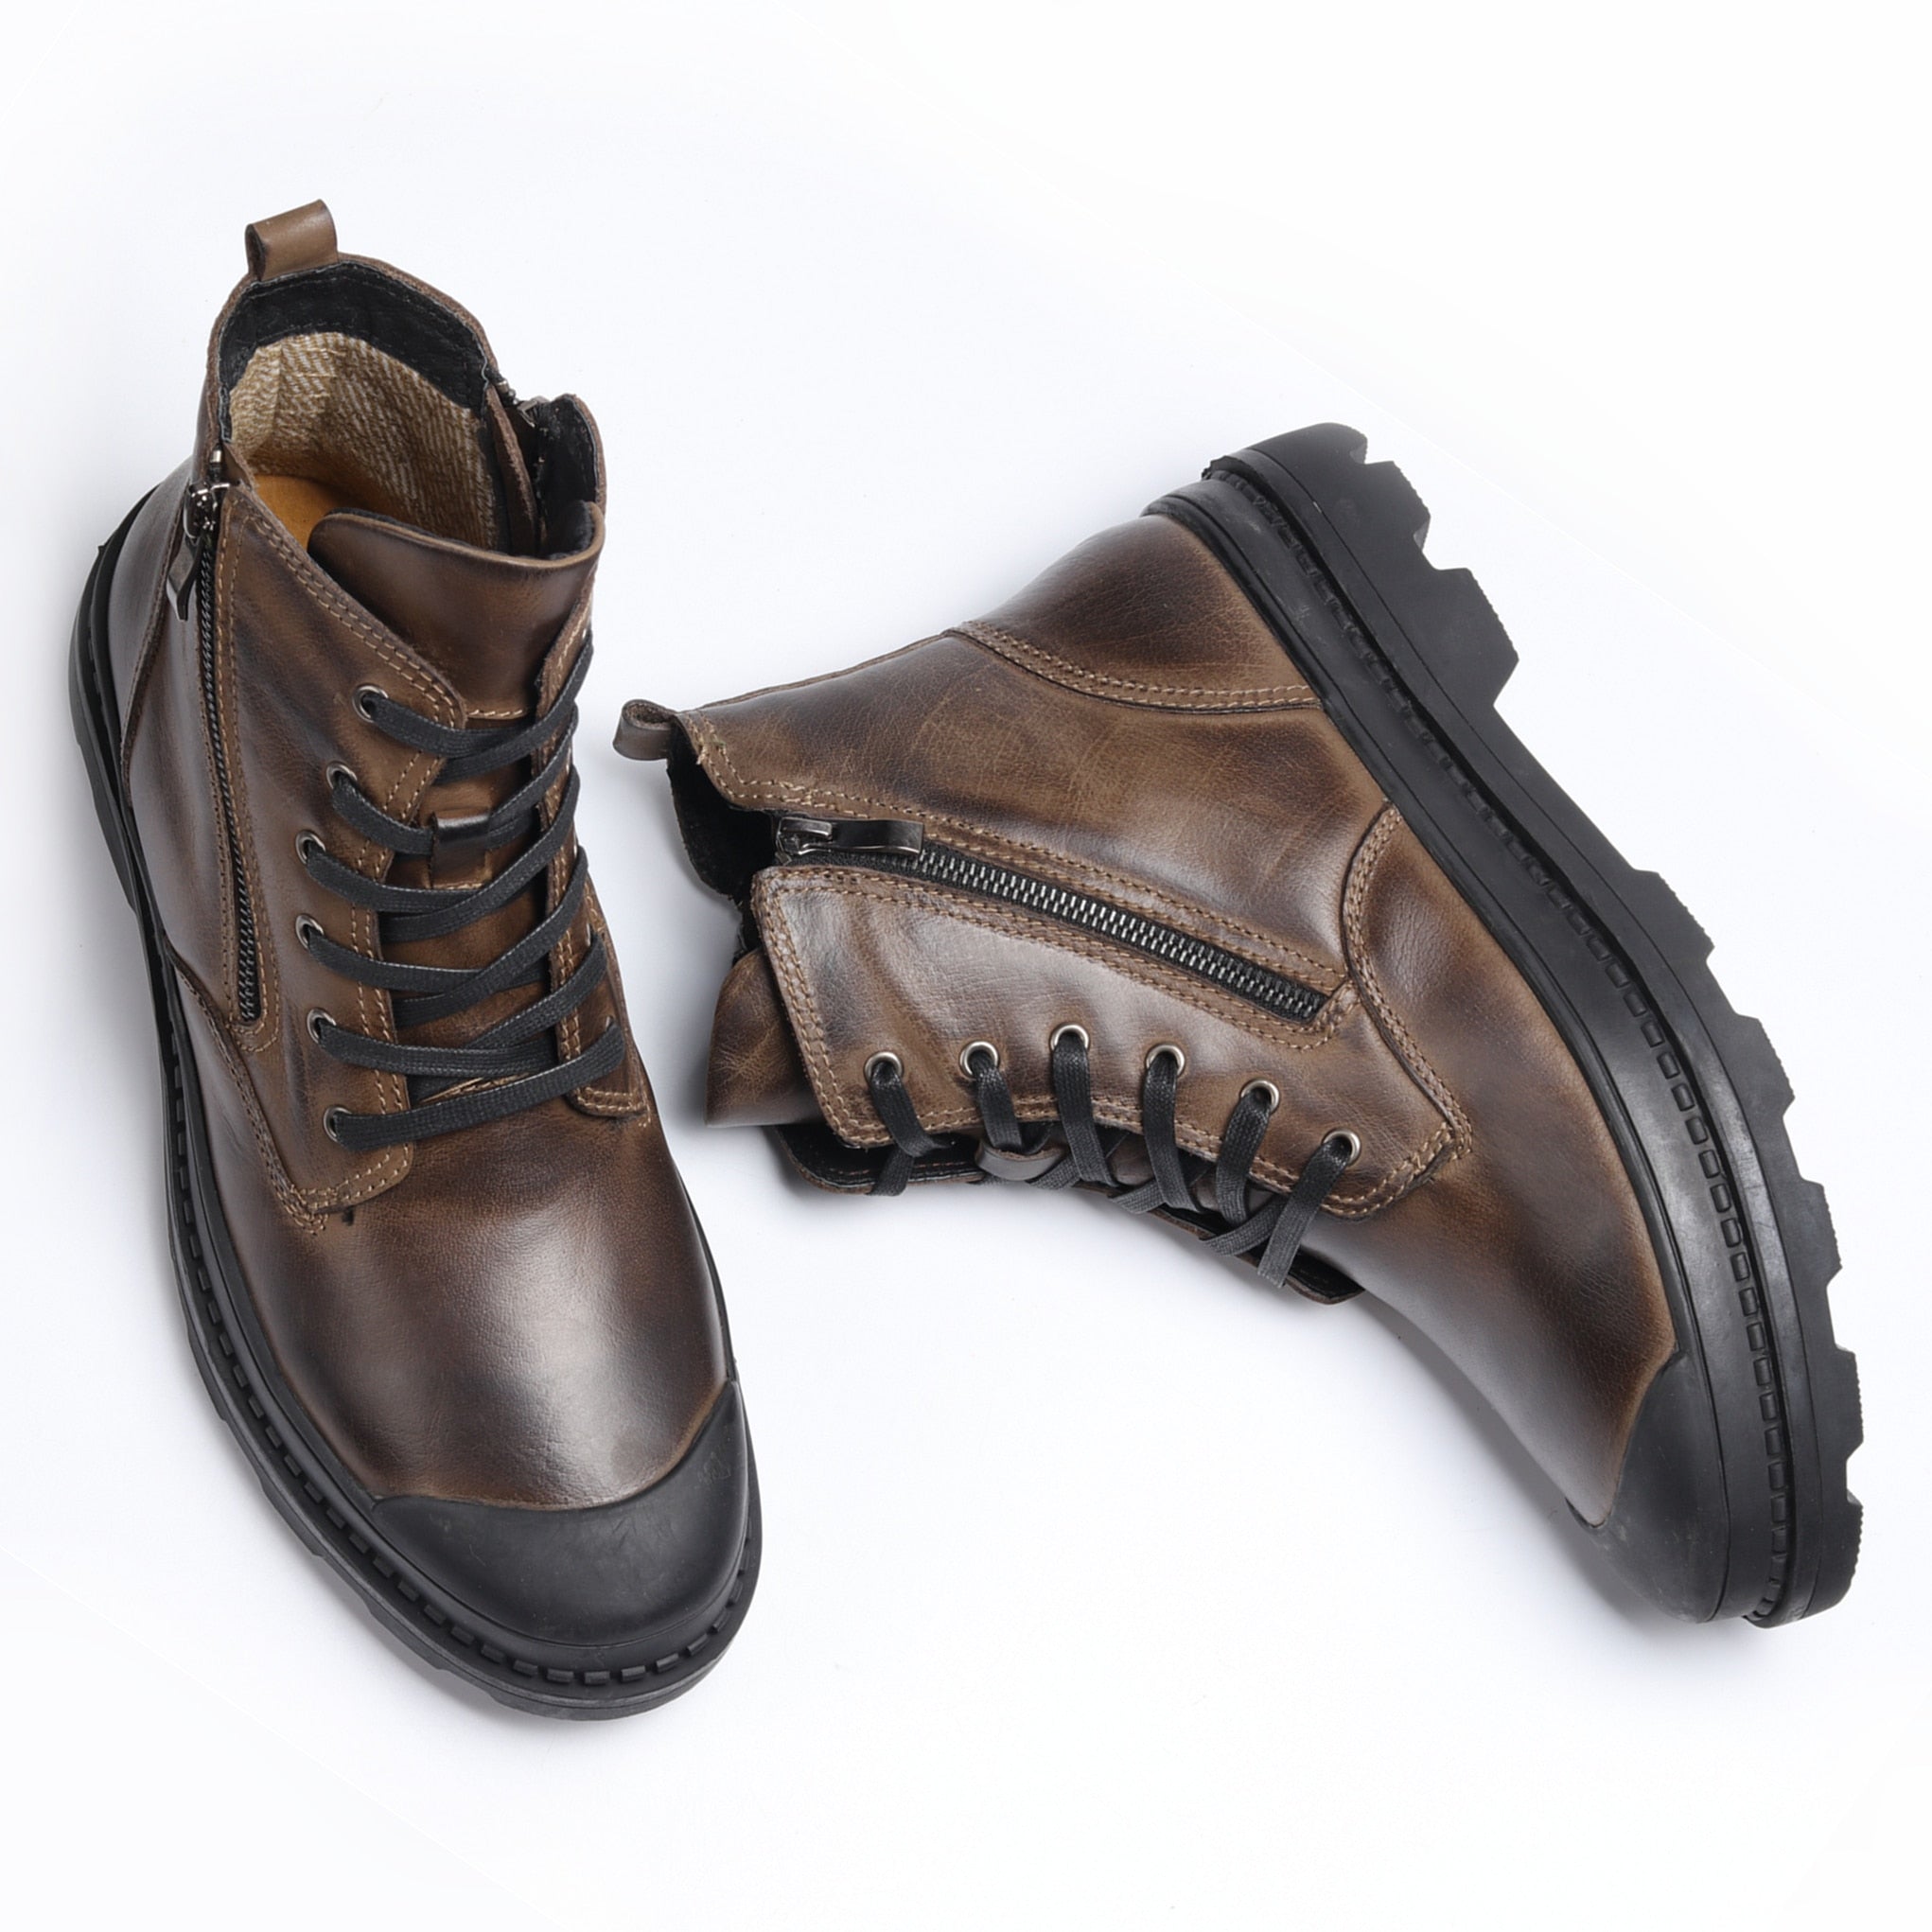 Spring Classic Genuine Leather Boots